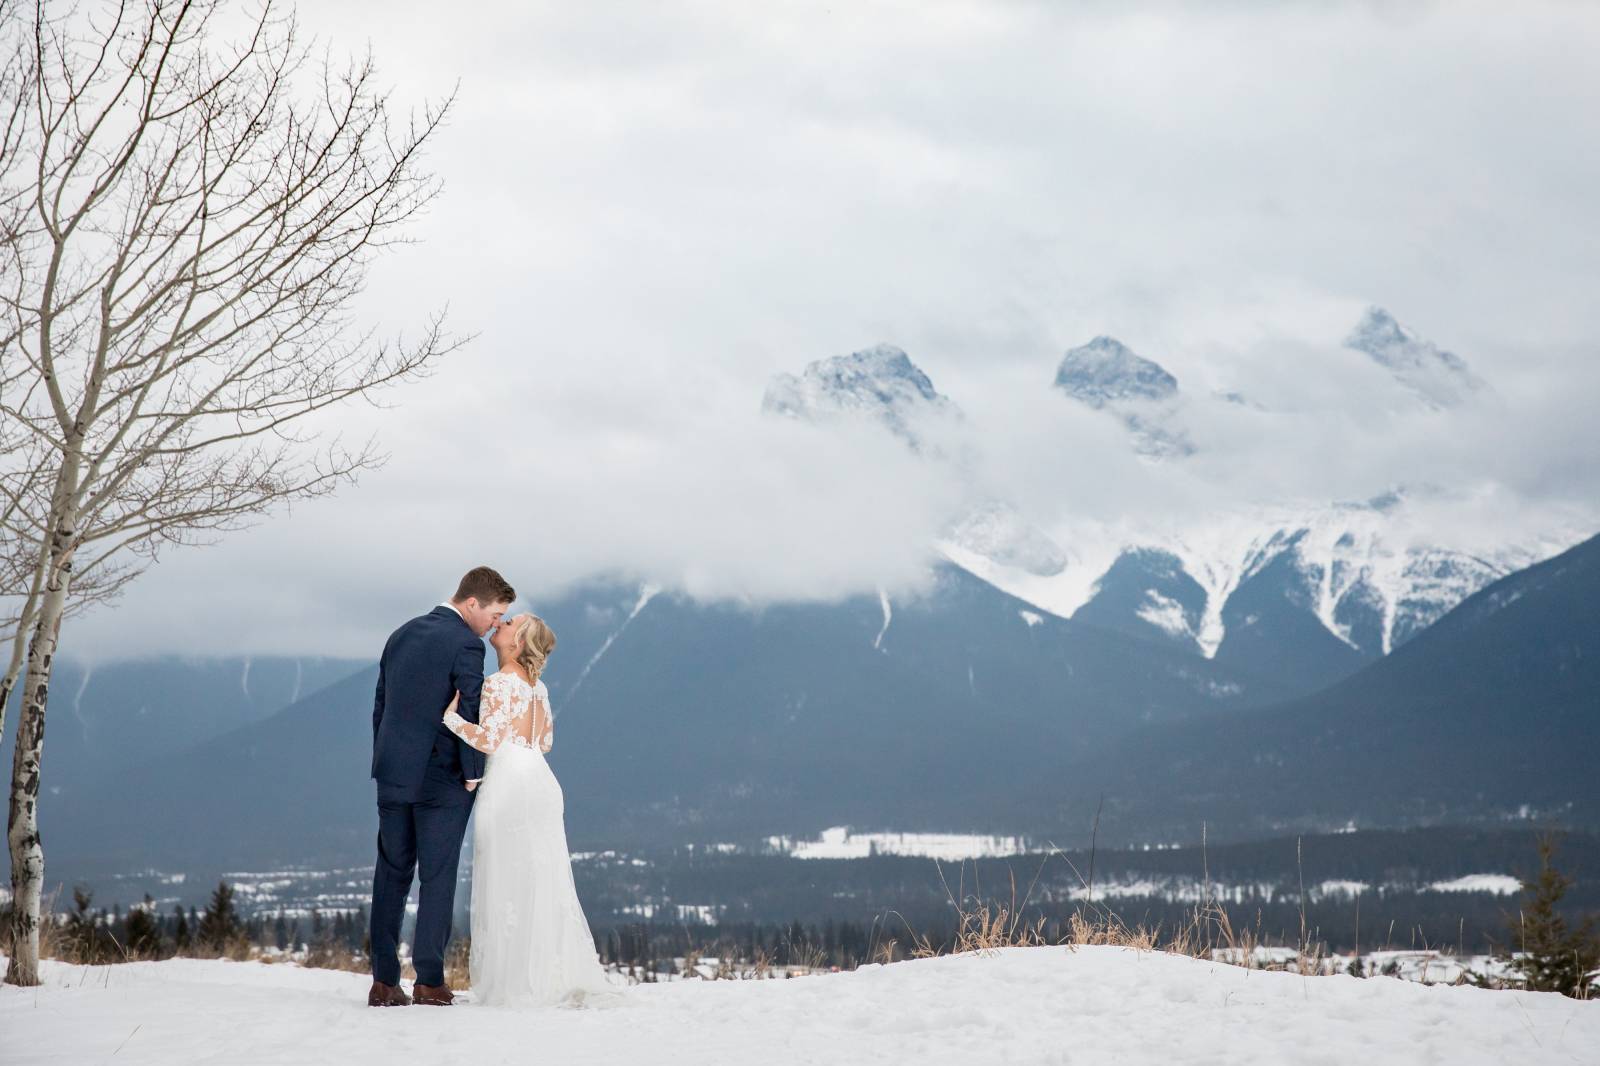 Canmore Winter wedding, Three Sisters in wedding photos, Canmore wedding photographer, Canmore elope